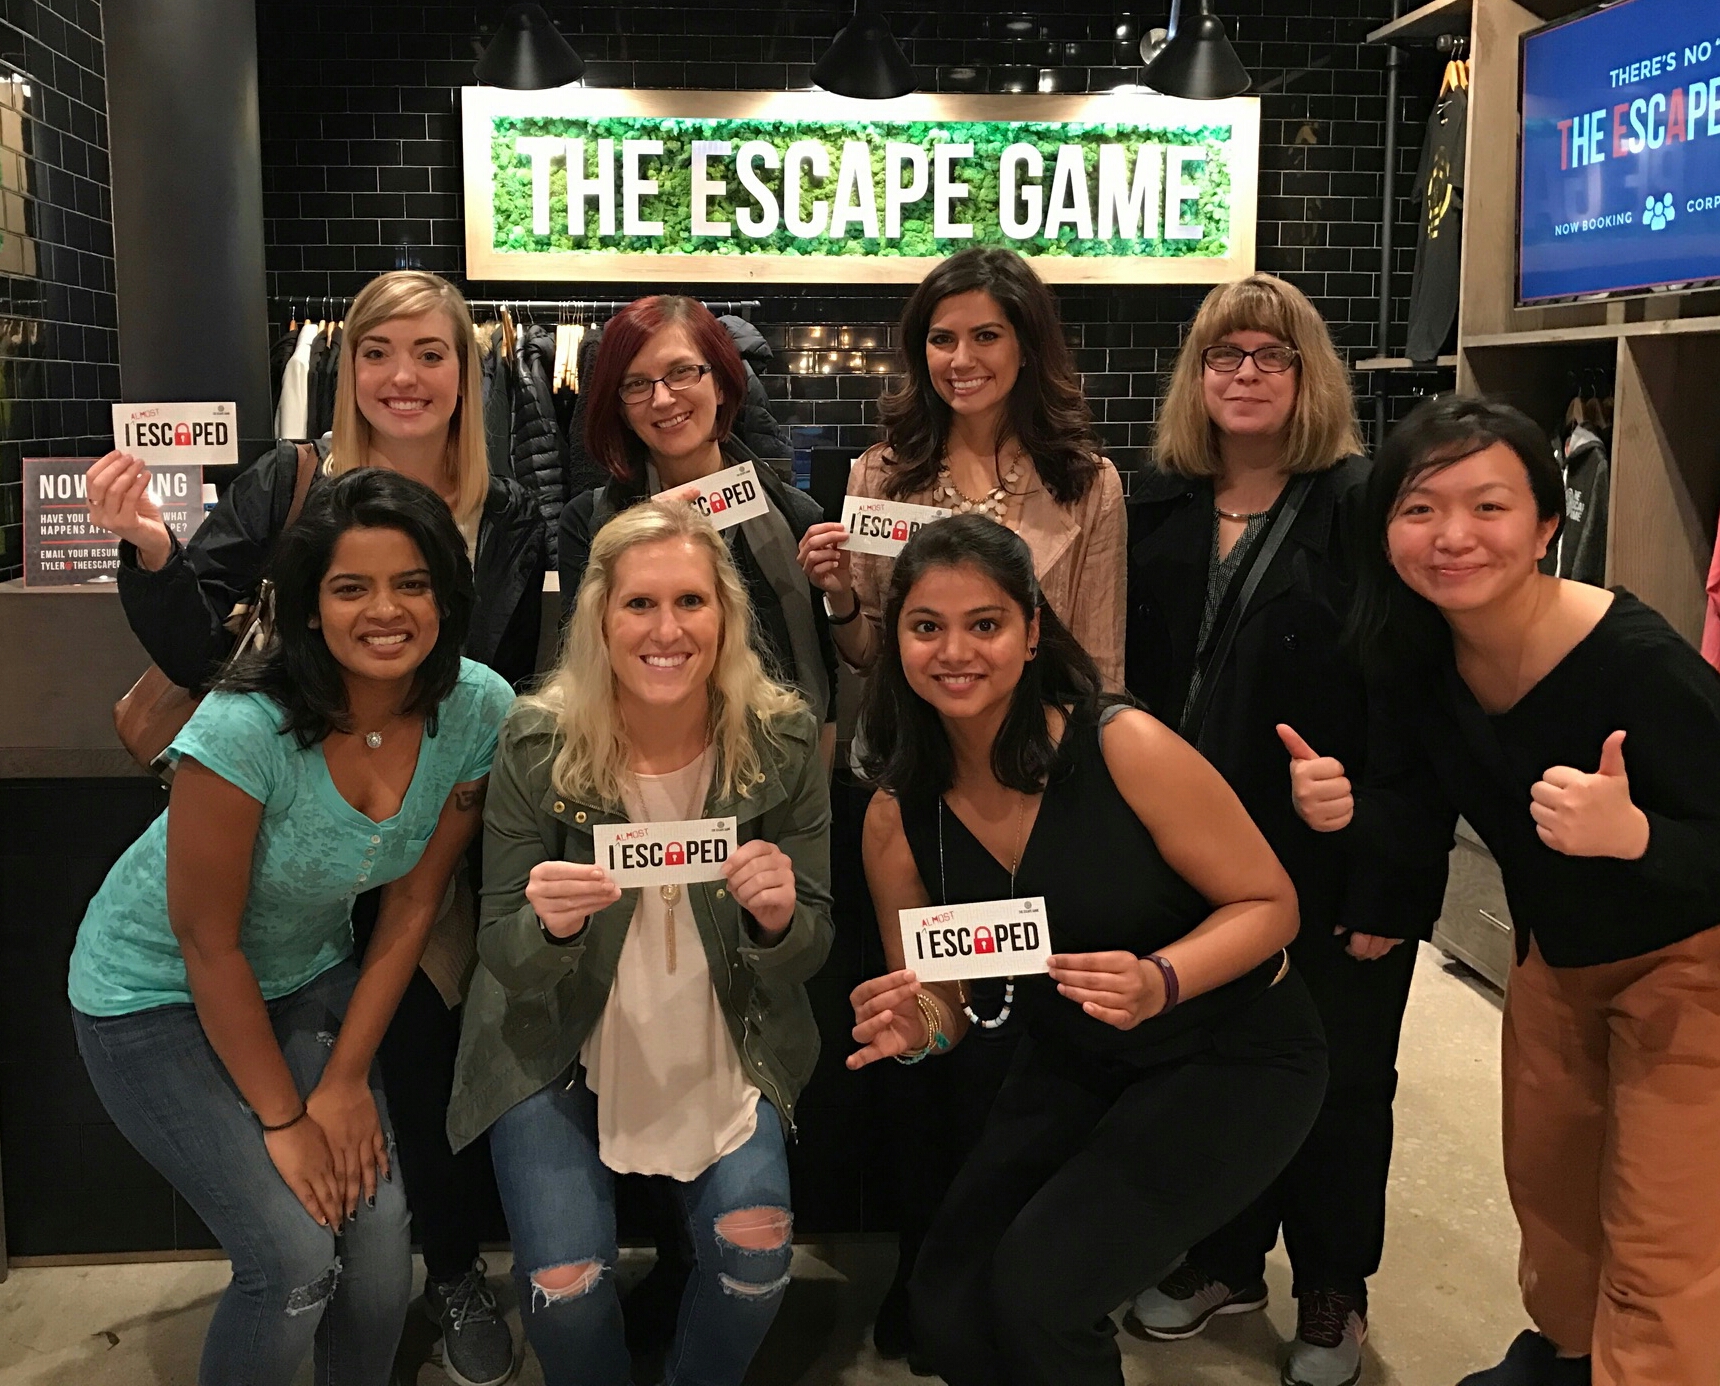 PCMI Women's Outing - The Escape Game Chicago